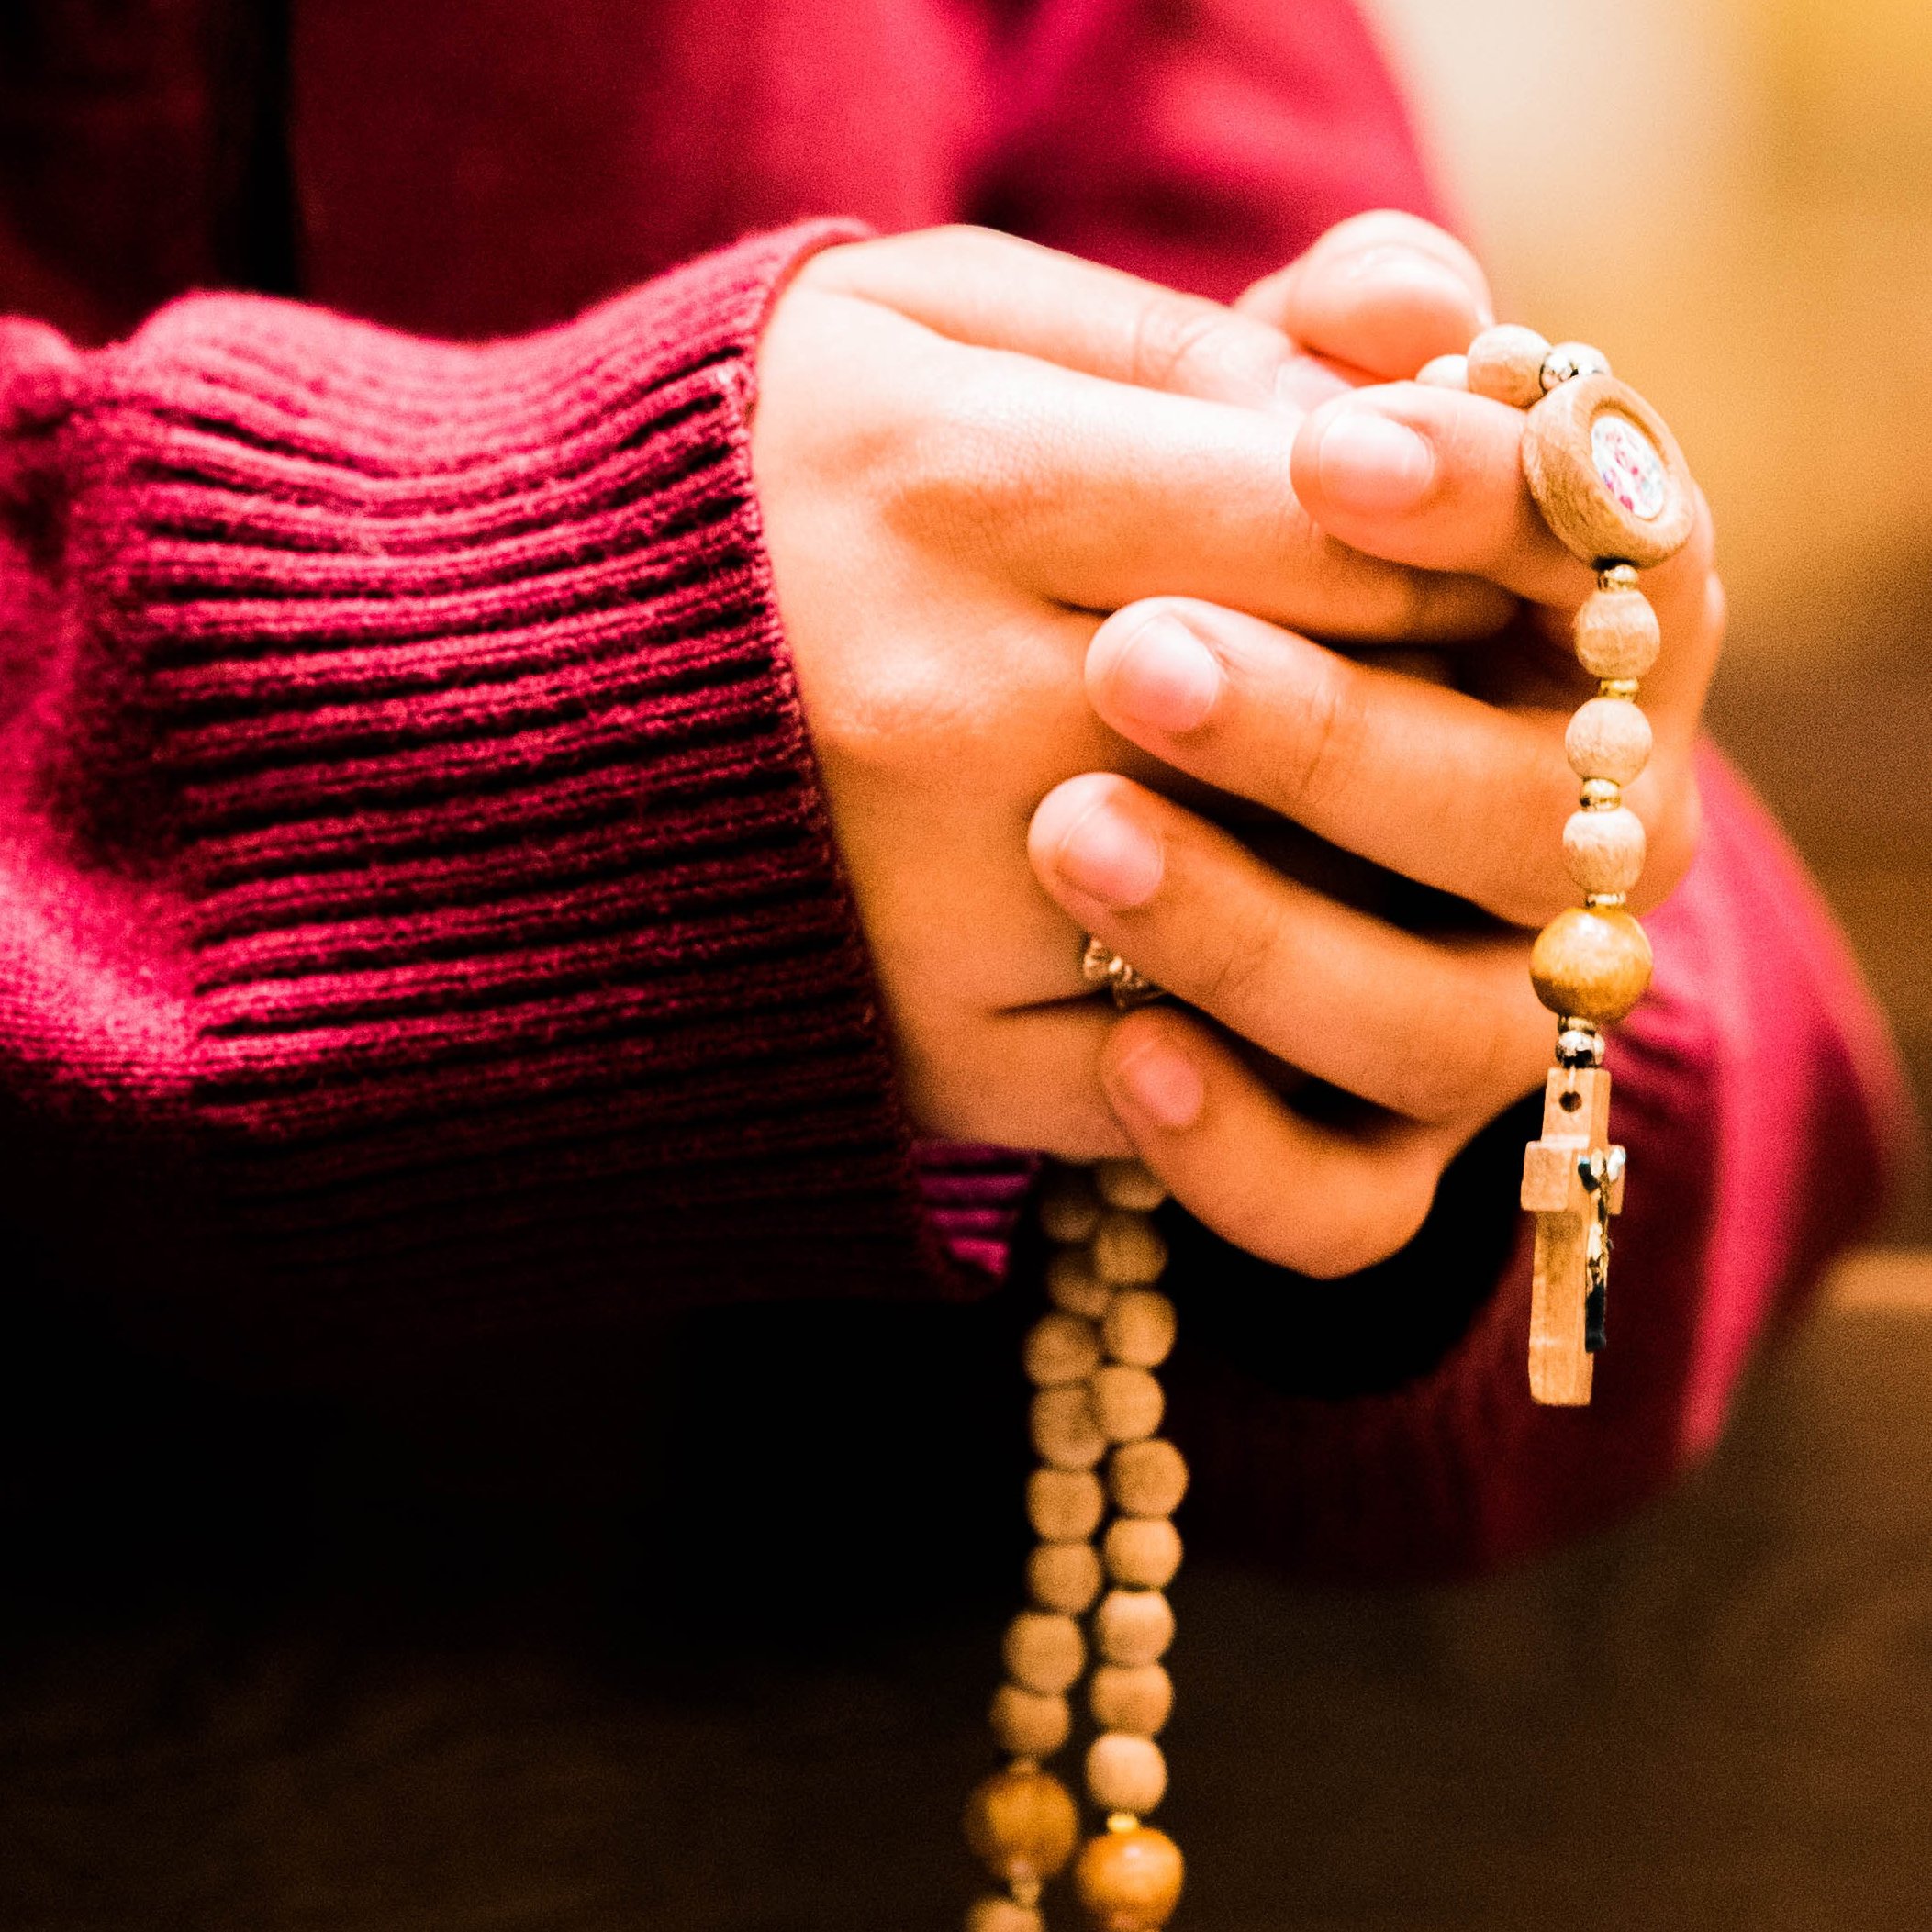 Rosary in Hands